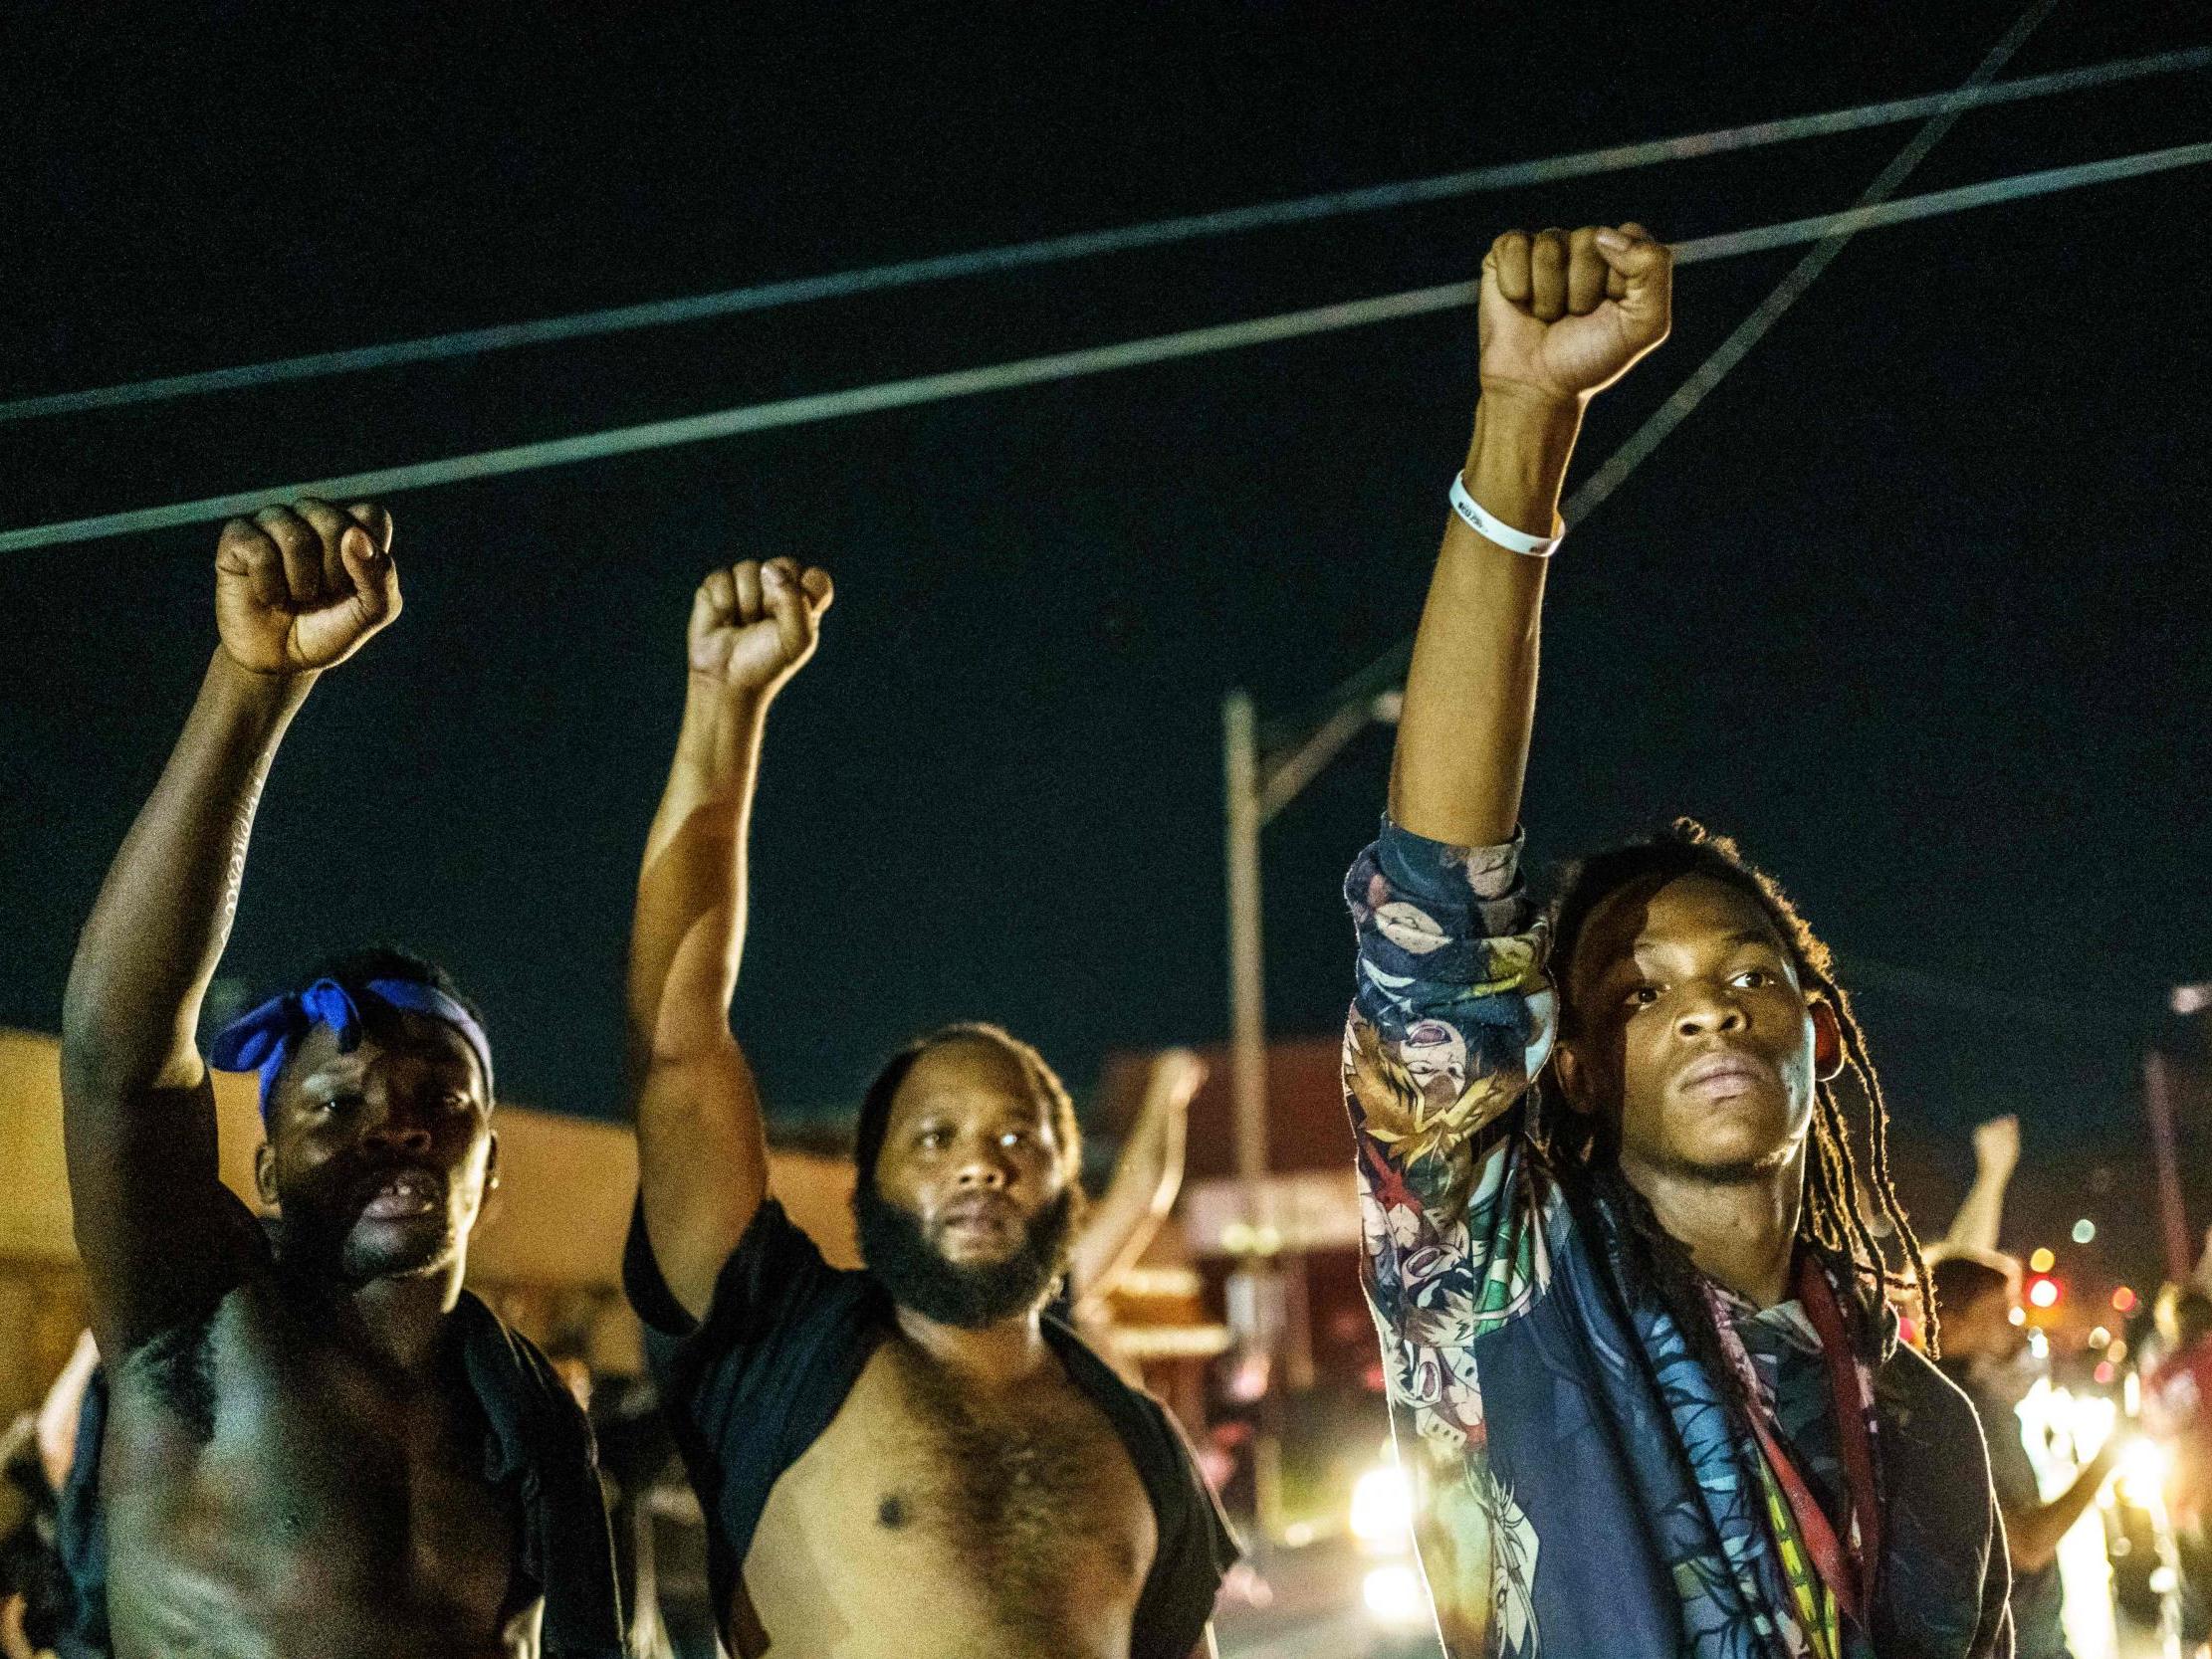 Protesters raise their fists during a demonstration against the shooting of Jacob Blake in Kenosha, Wisconsin